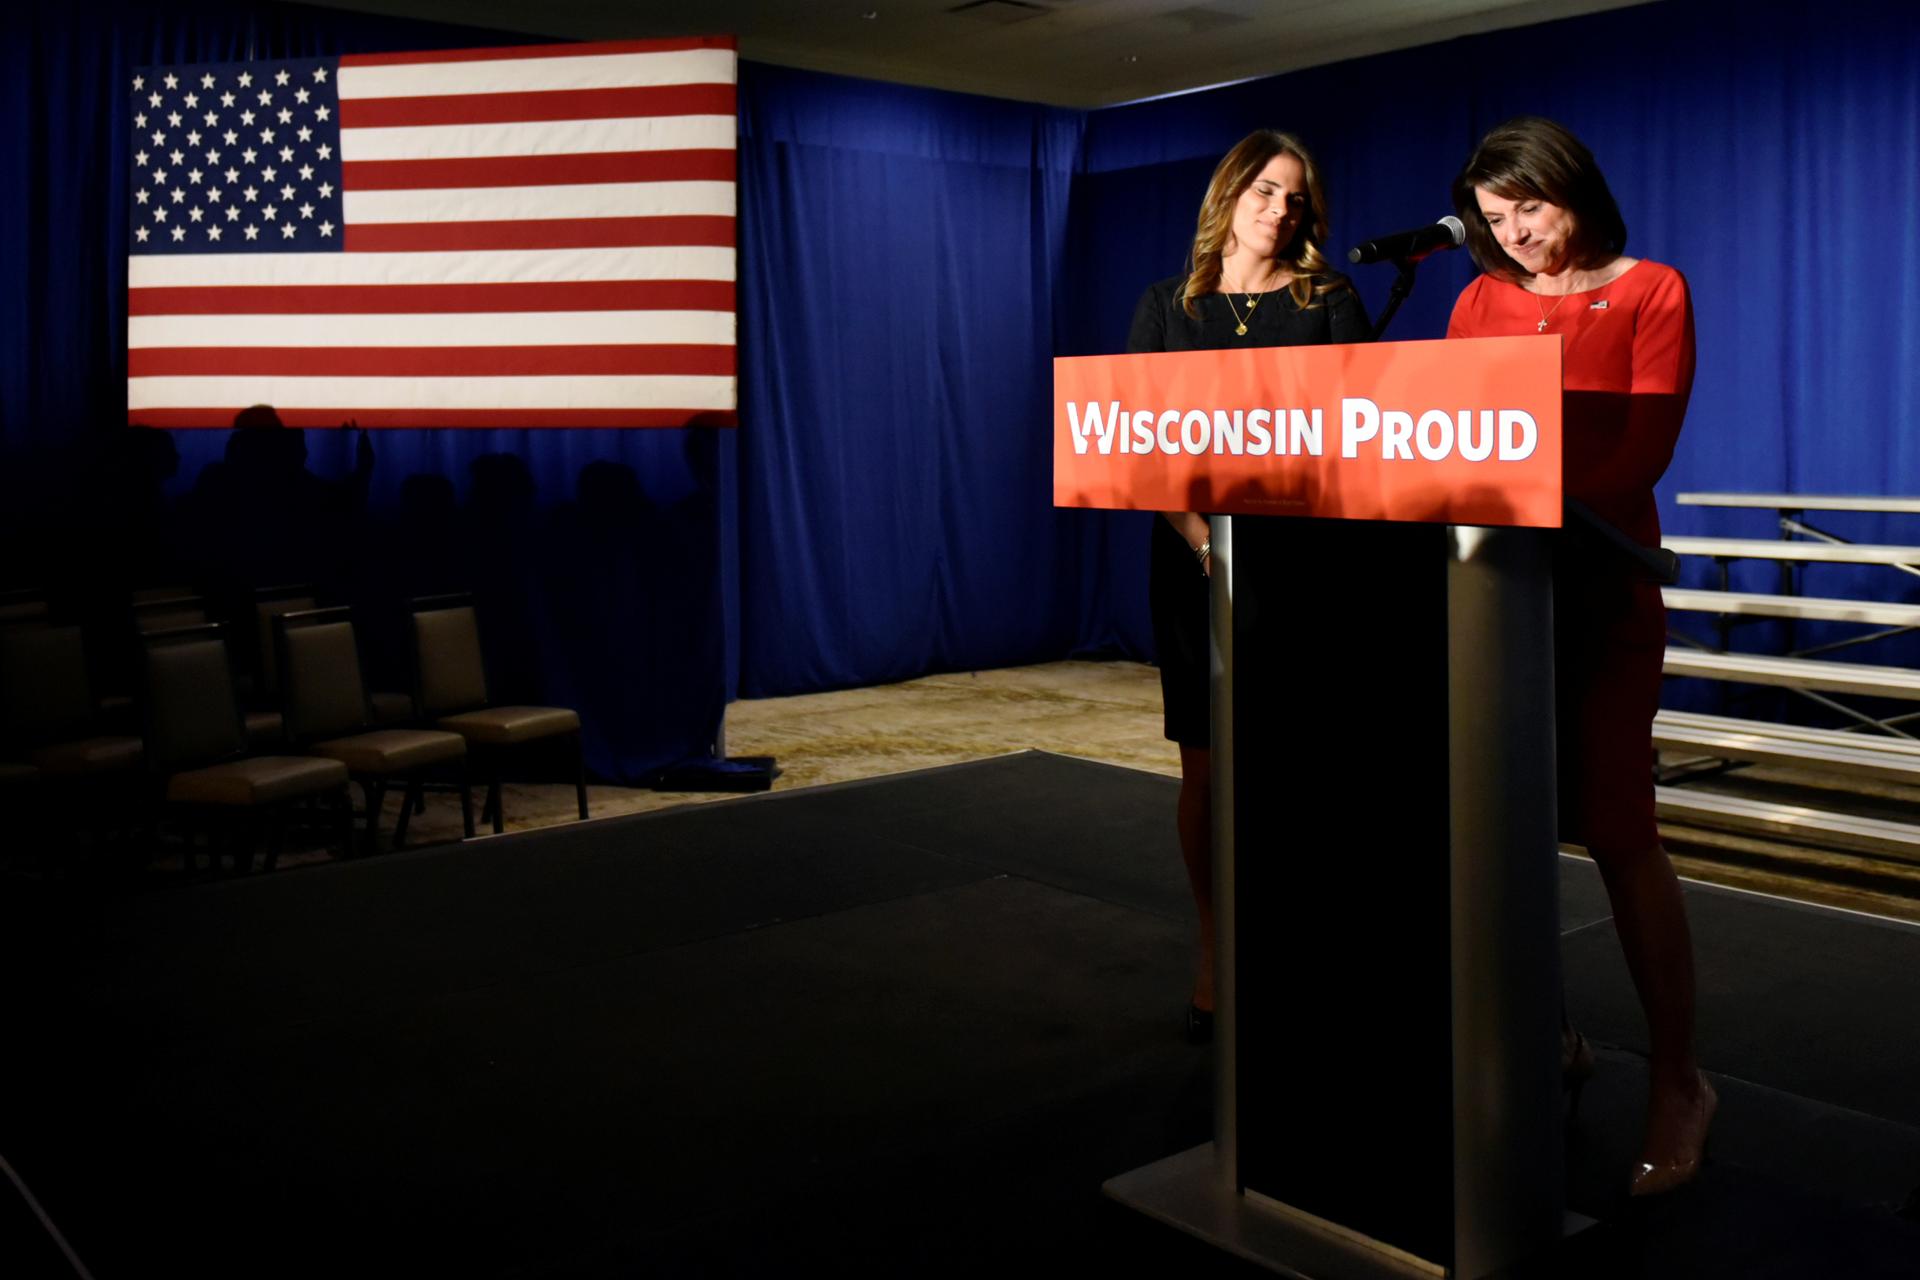 Two women stand at podium, sign reads, "Wisconsin Proud"